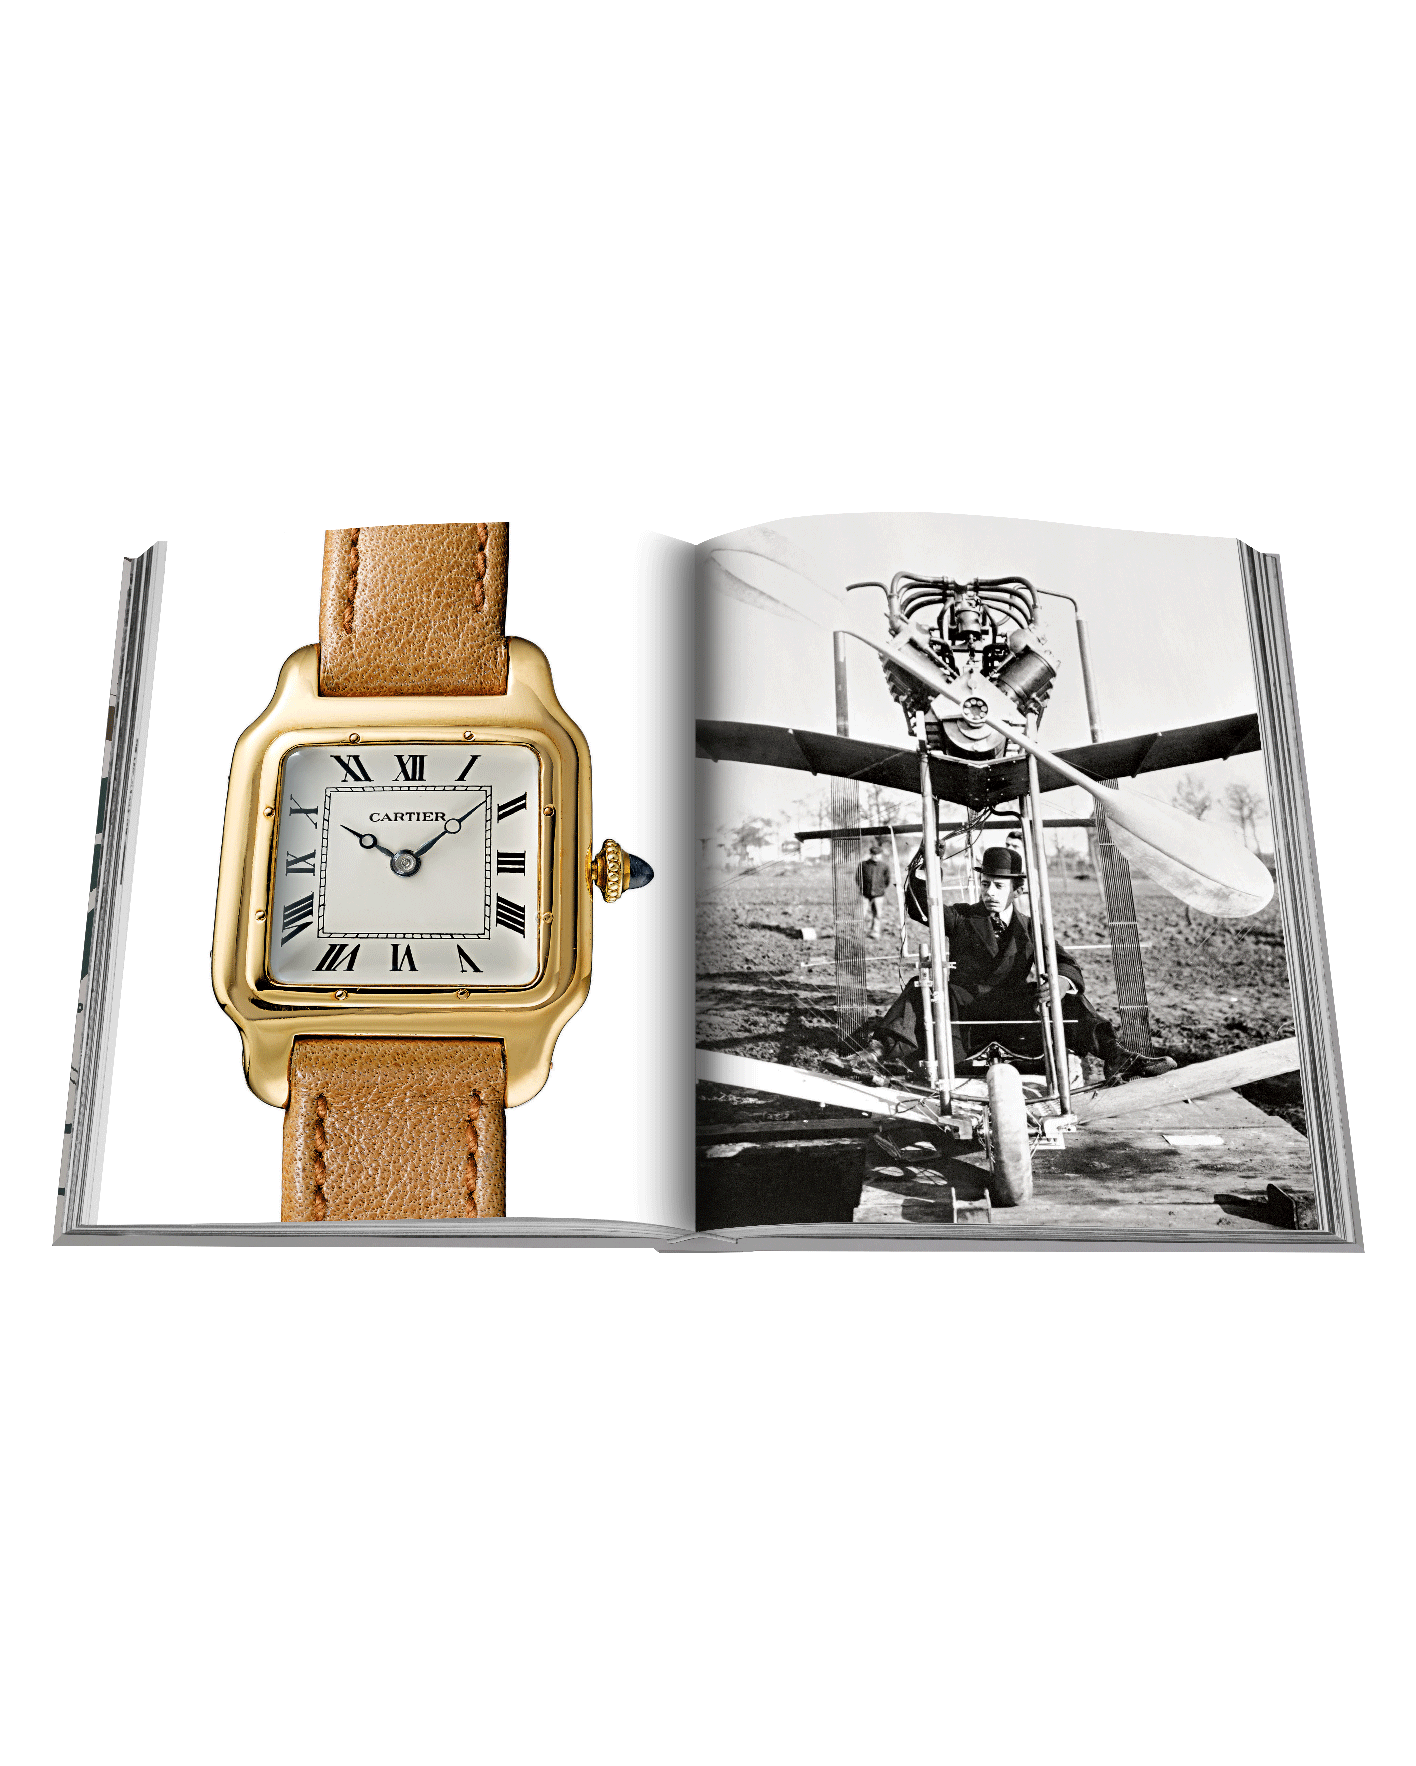 libro assouline watches a guide by hodinkee